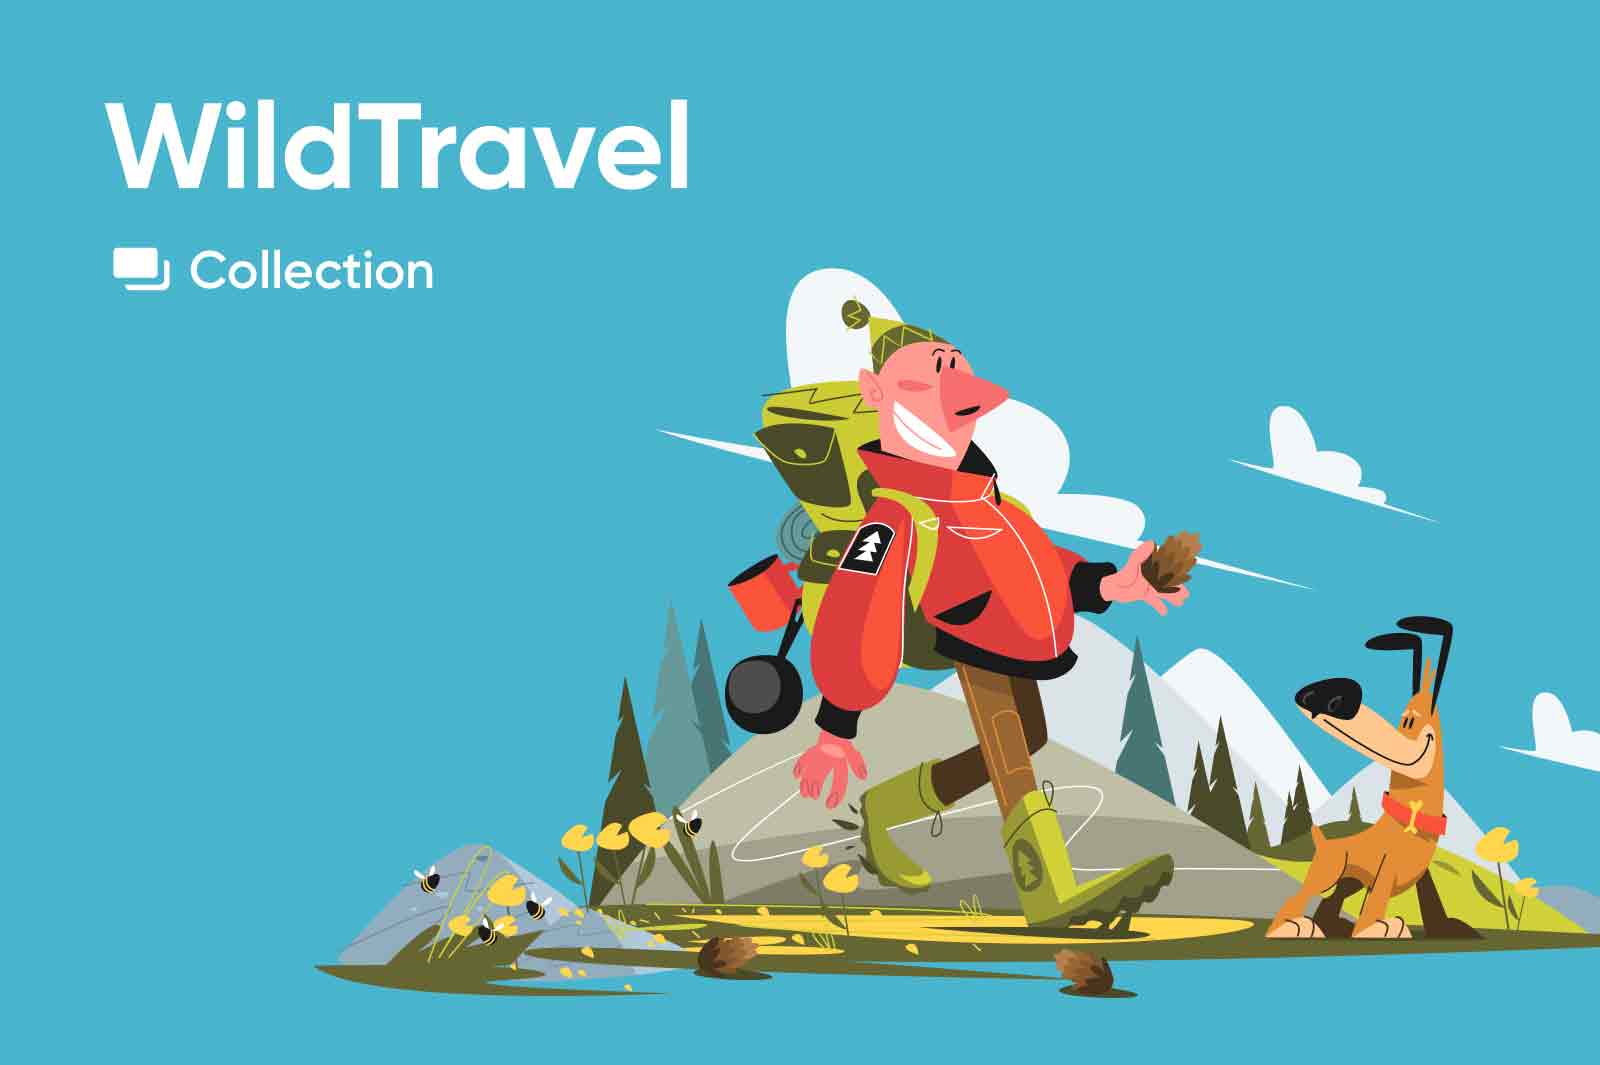 Illustrated story of two best friends go travel in wild. Vector illustrations.